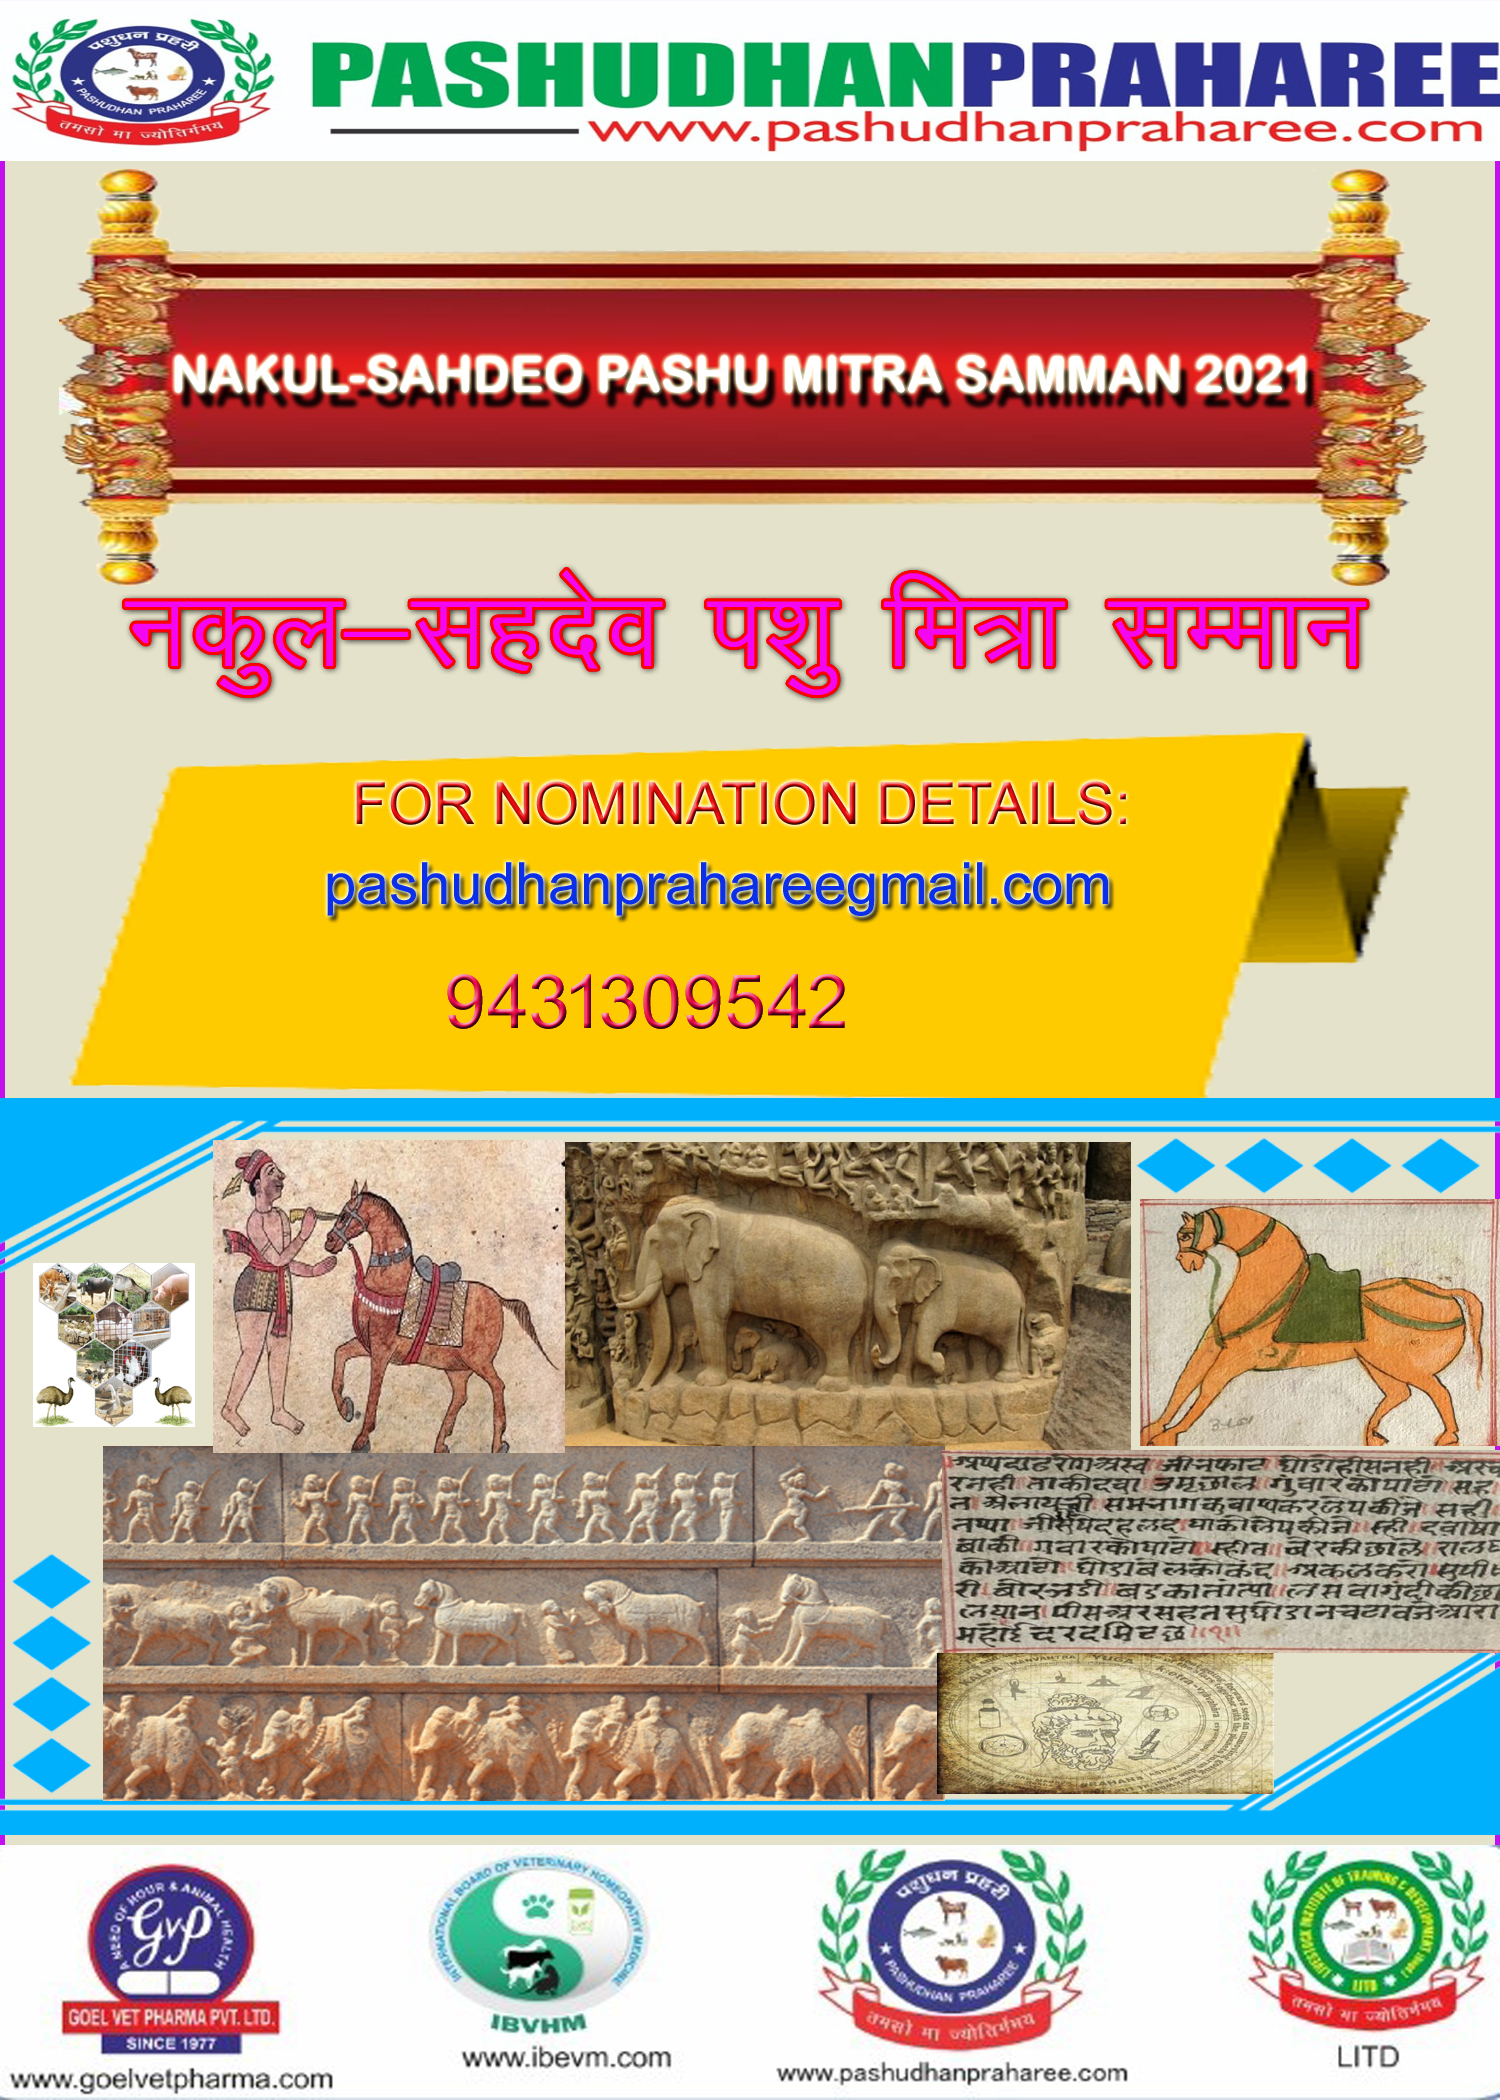 Veterinary Science In Ancient India & Significance of Nakul and Sahdev in  'Mahabharata'